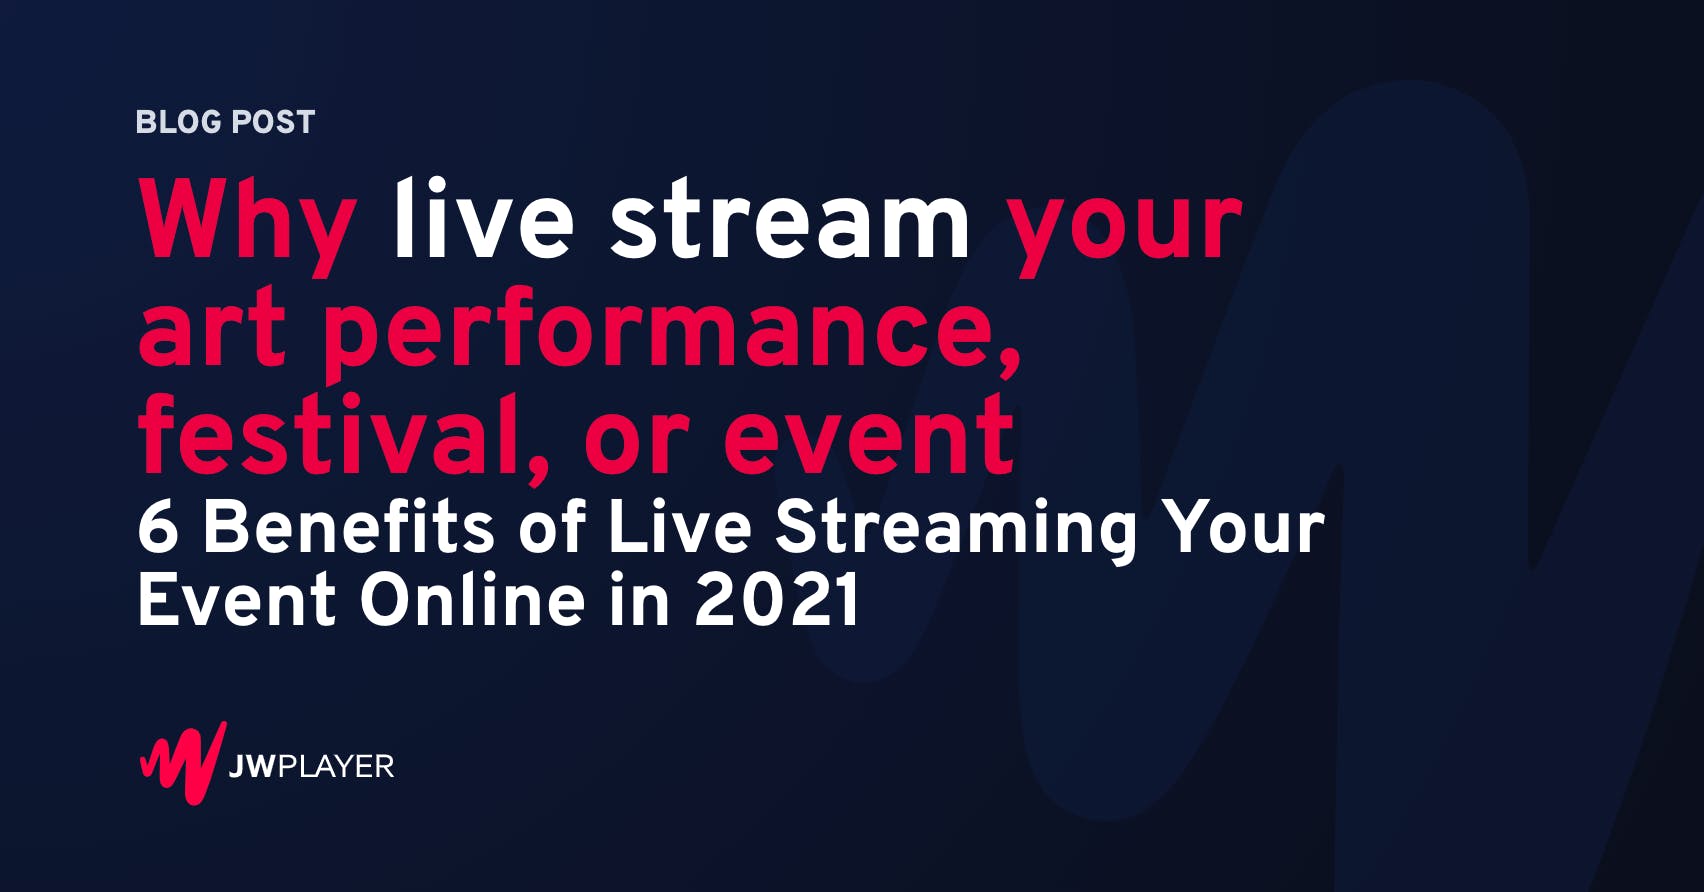 Why live stream your art performance, festival, or event - 6 benefits